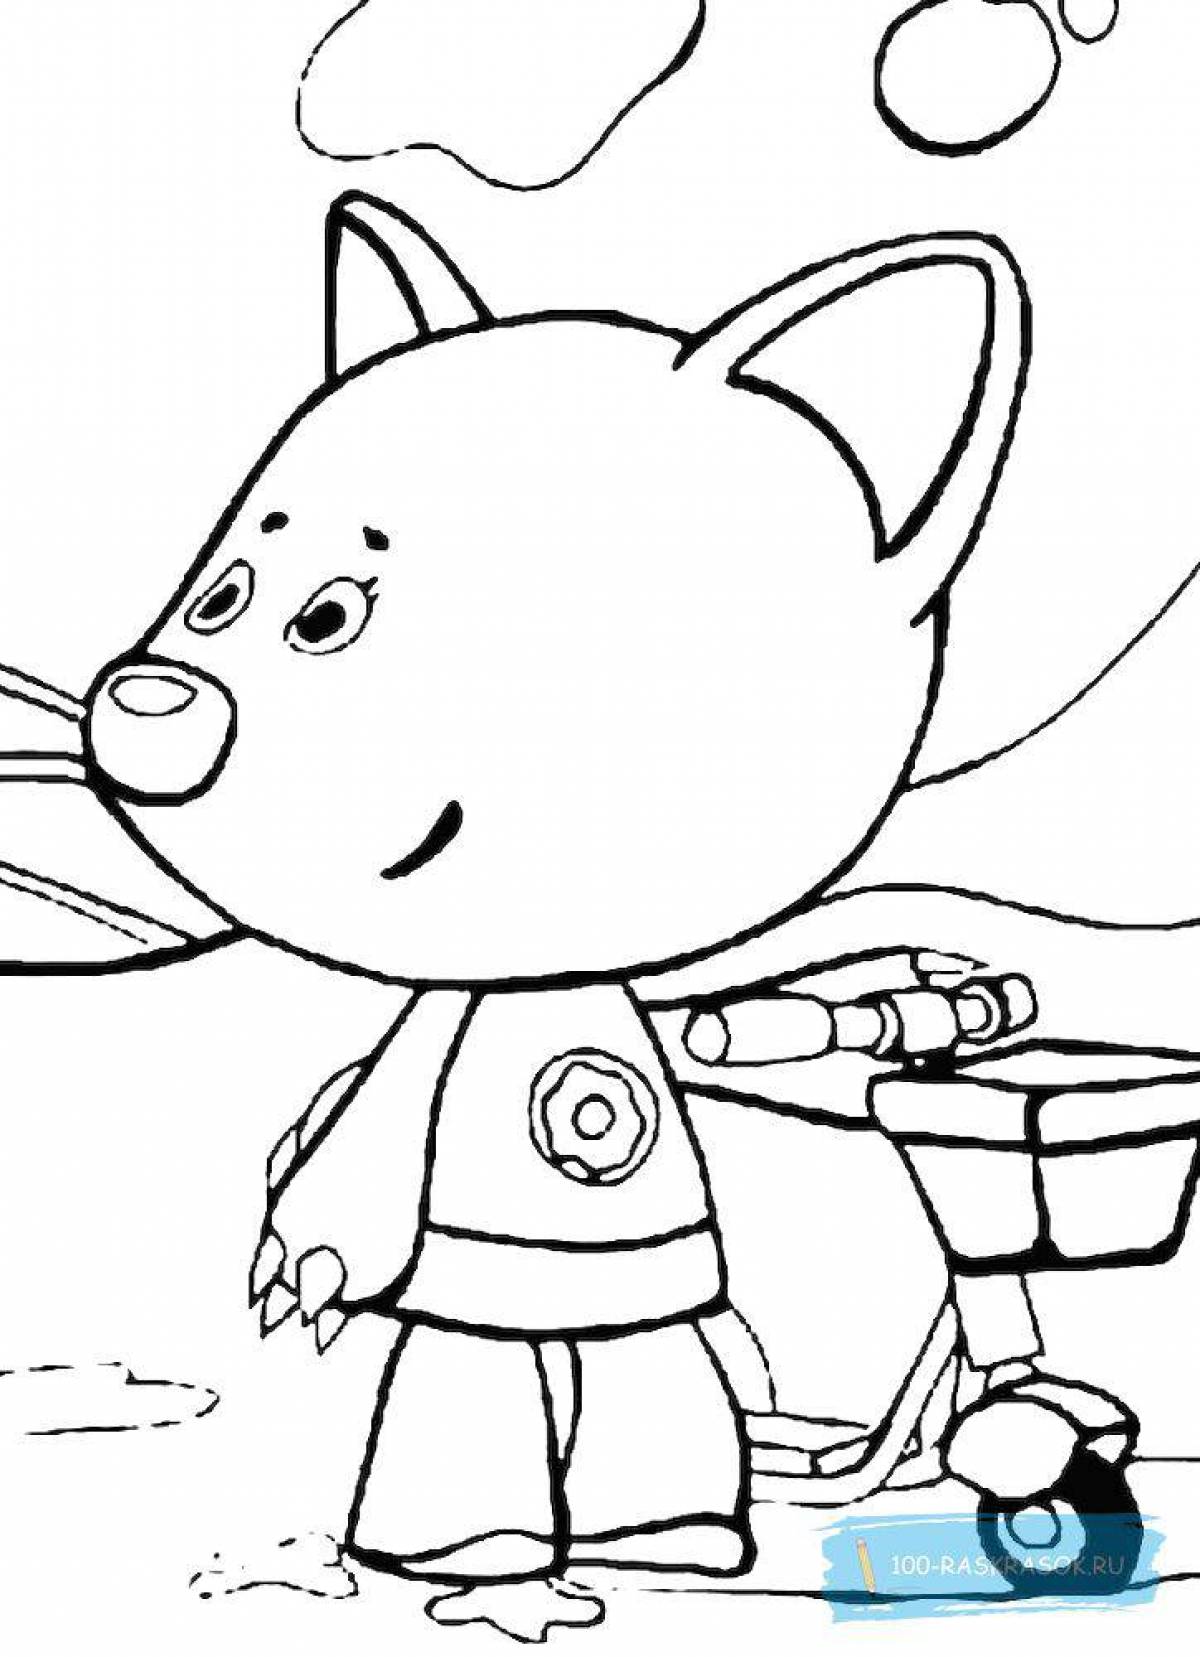 Turn on the cute bear coloring #8